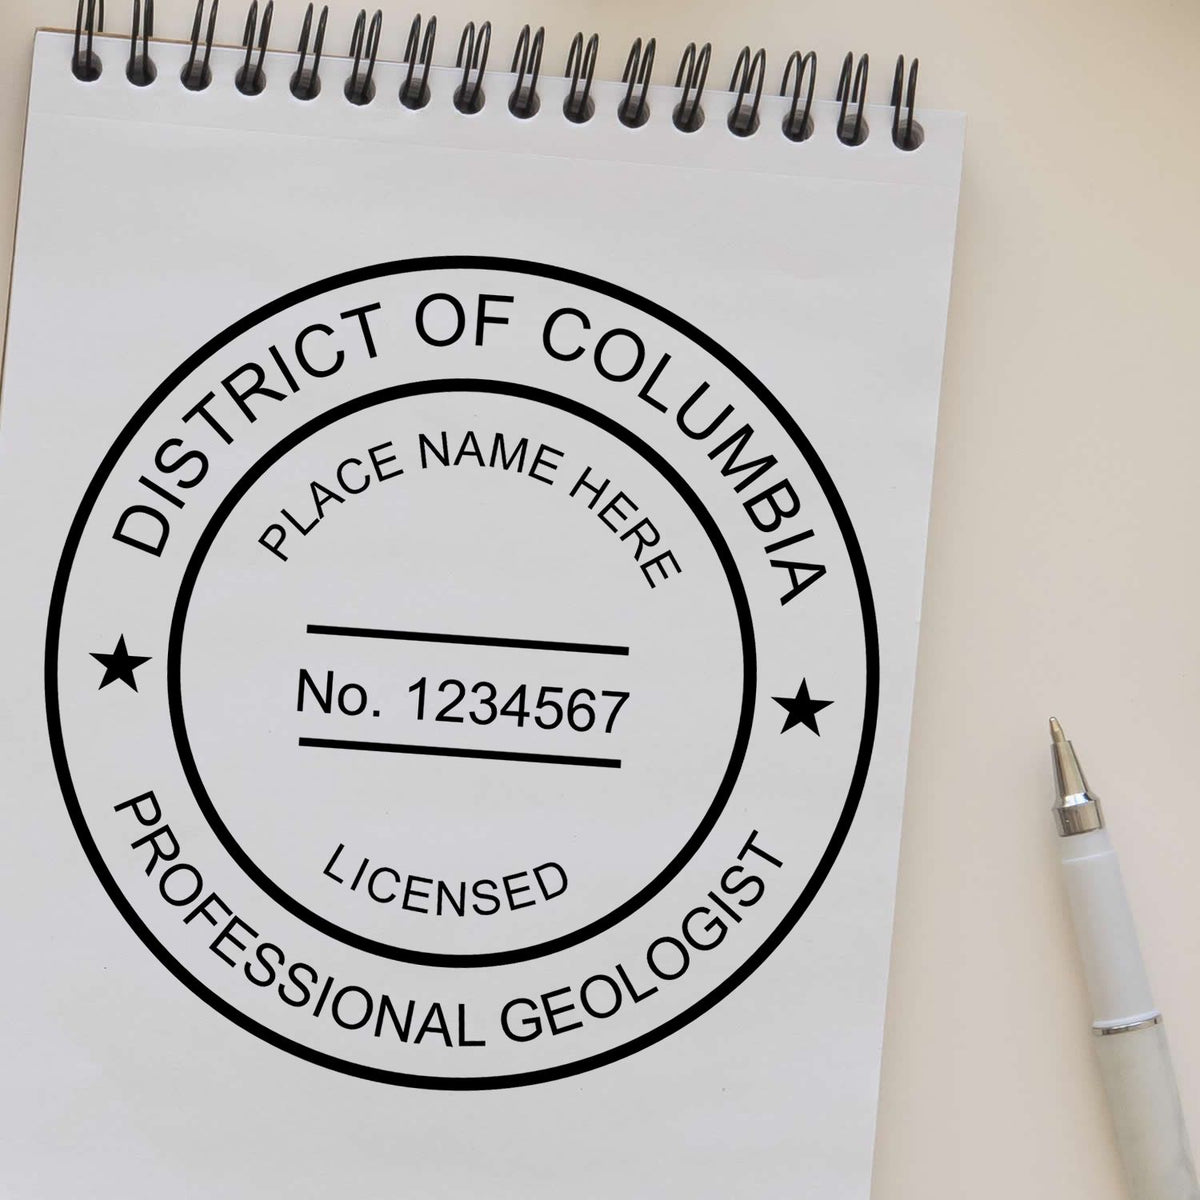 The District of Columbia Professional Geologist Seal Stamp stamp impression comes to life with a crisp, detailed image stamped on paper - showcasing true professional quality.